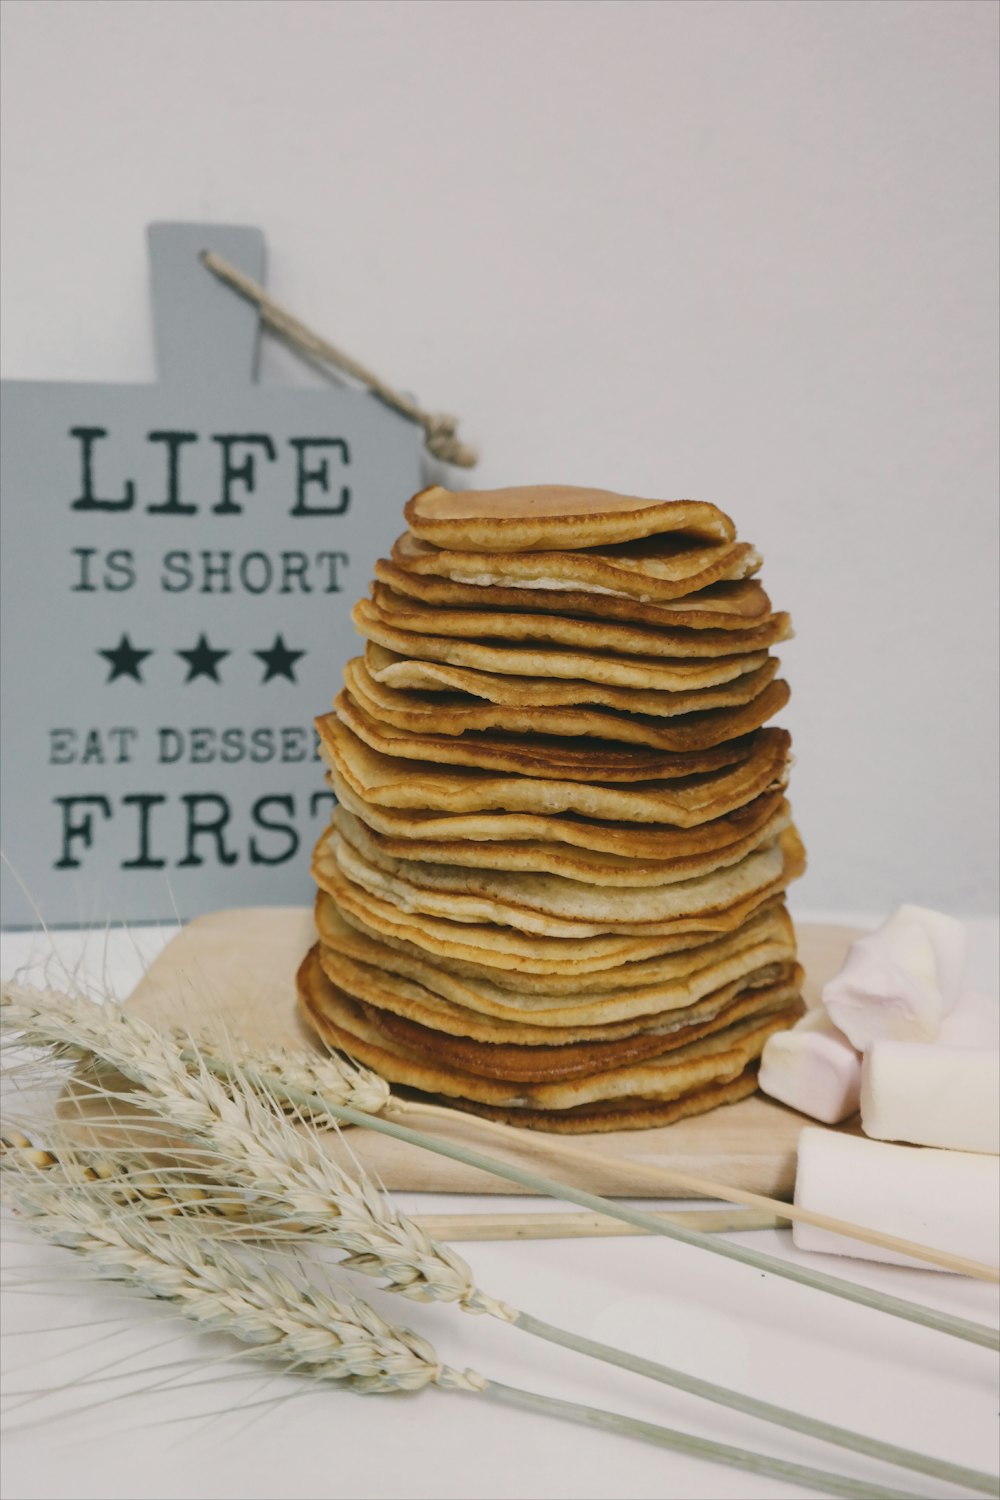 A pile of pancakes in front of a blue sign that says "Life is short - Eat pancakes first."